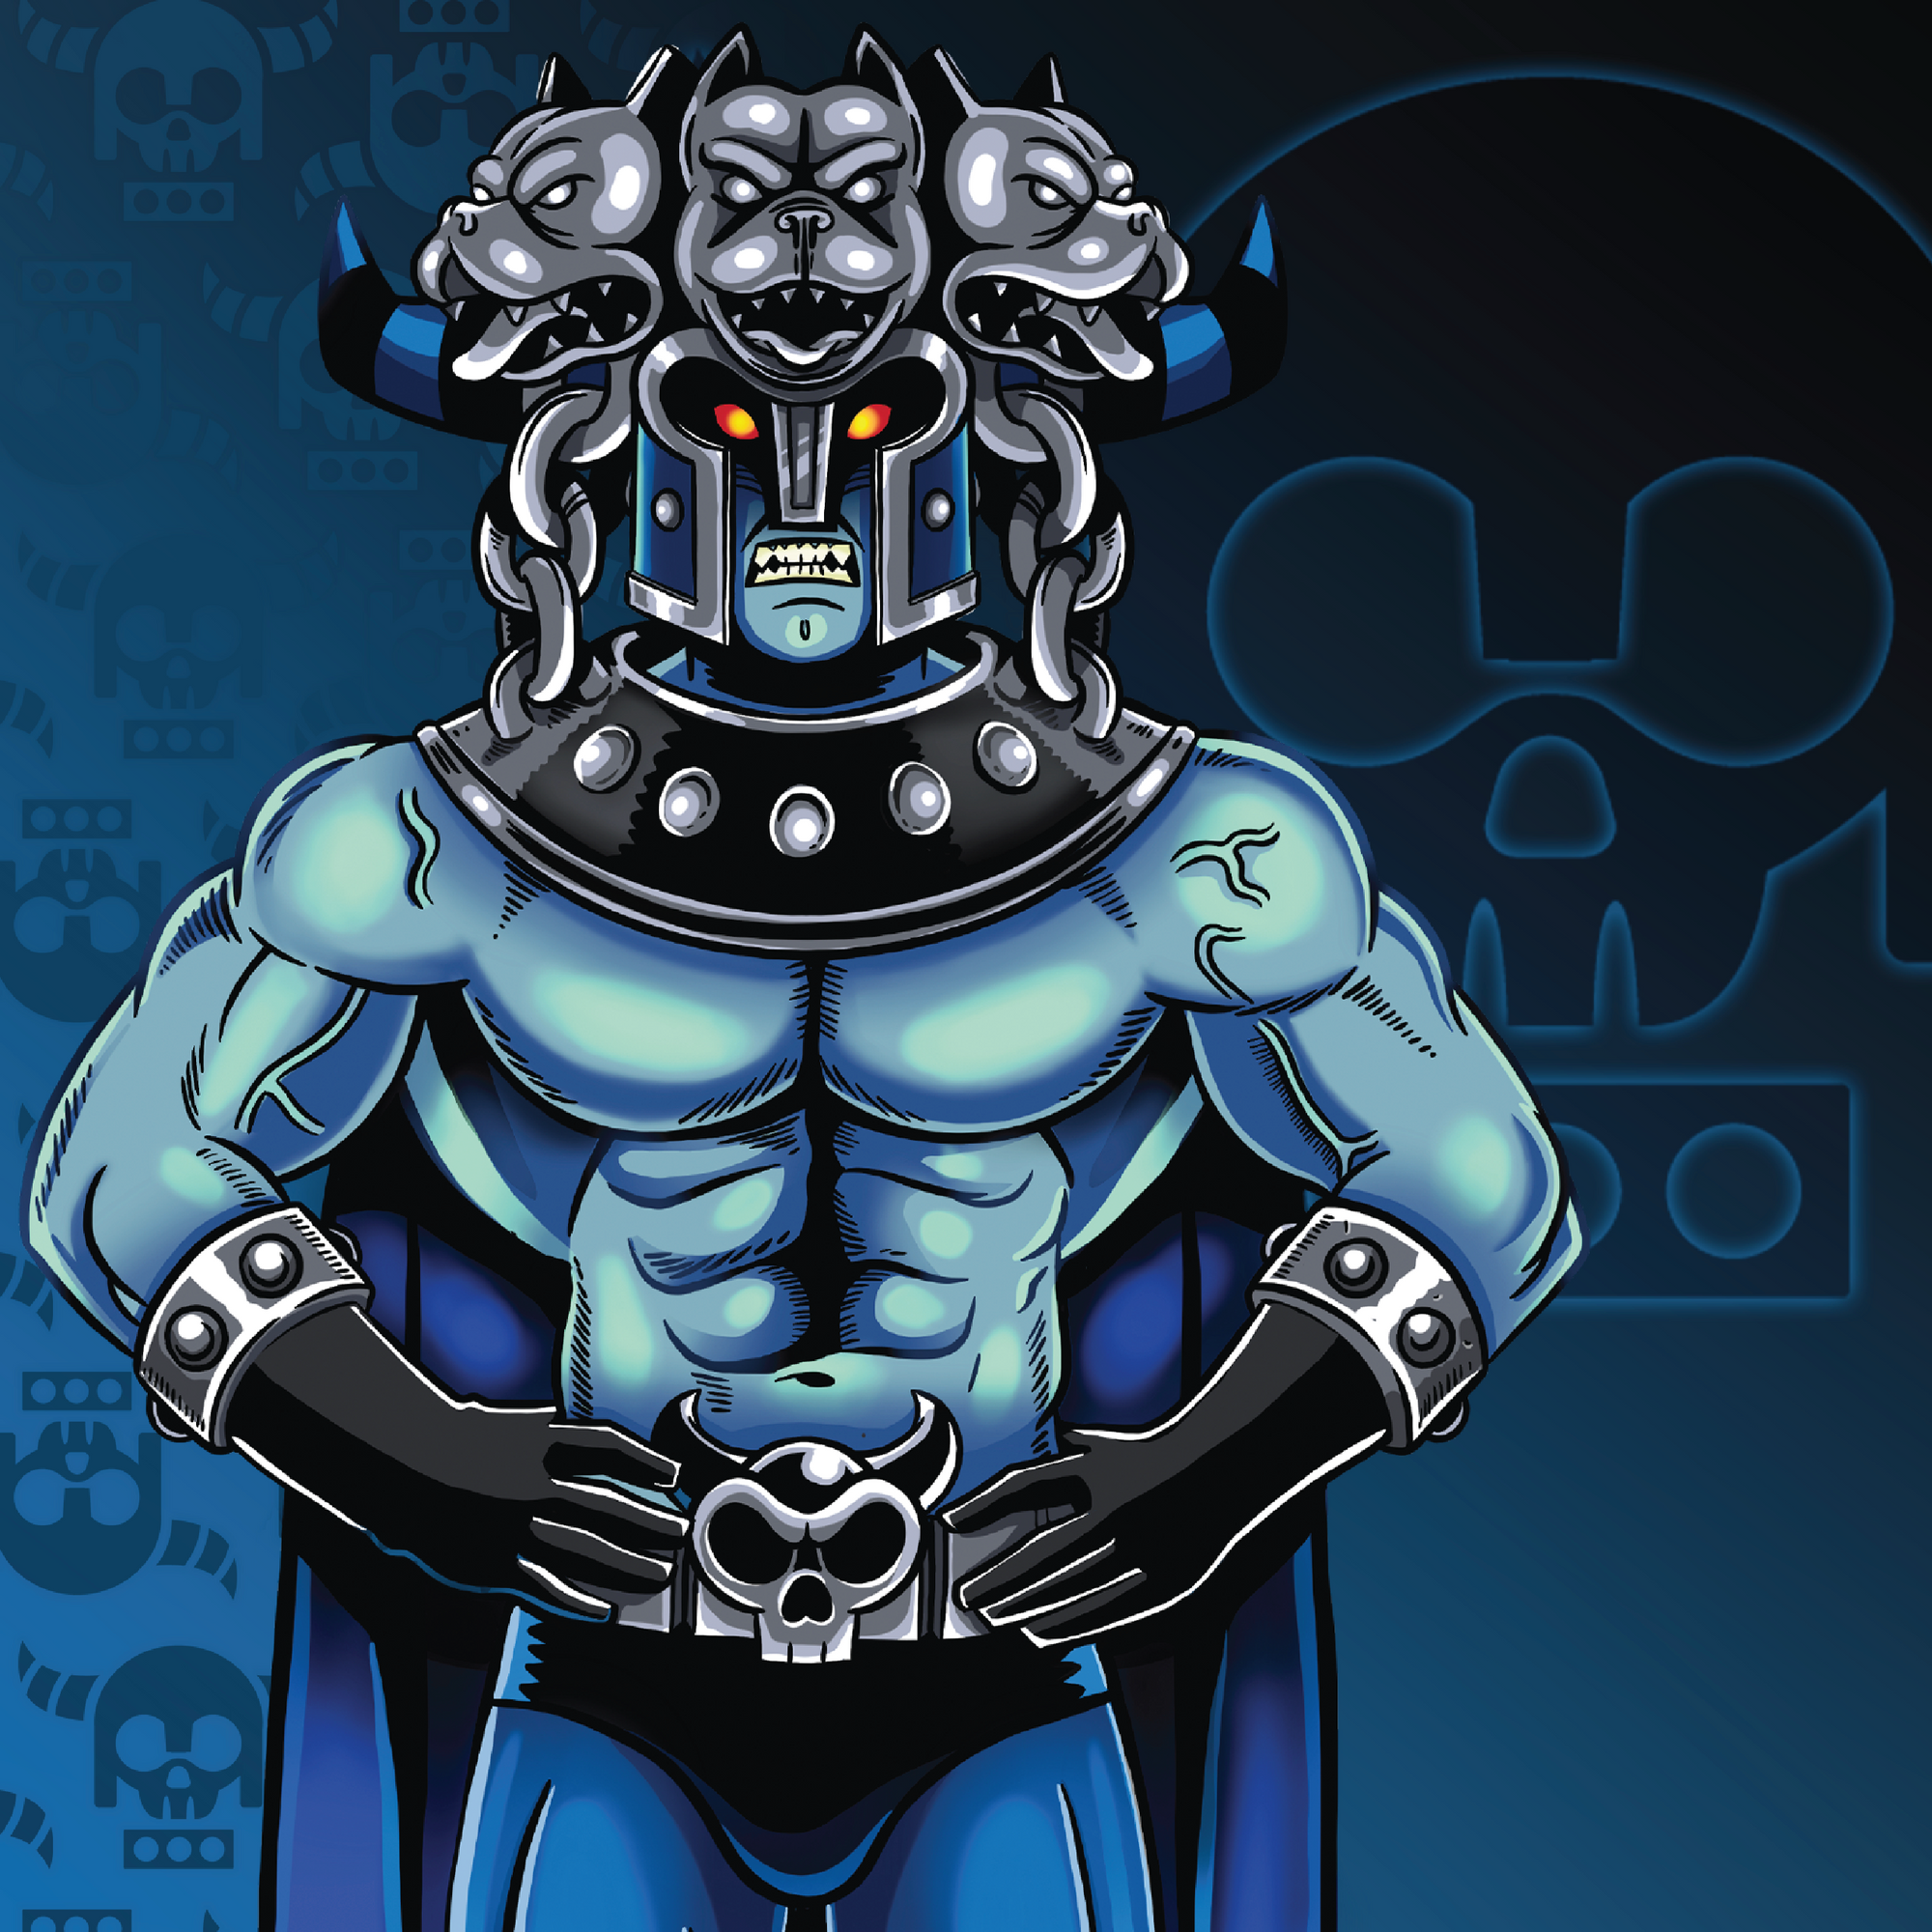 Comic style drawing of Greek Mythology character, Hades, action figure with Cerberus helmet with navy and black horns, and skull belt